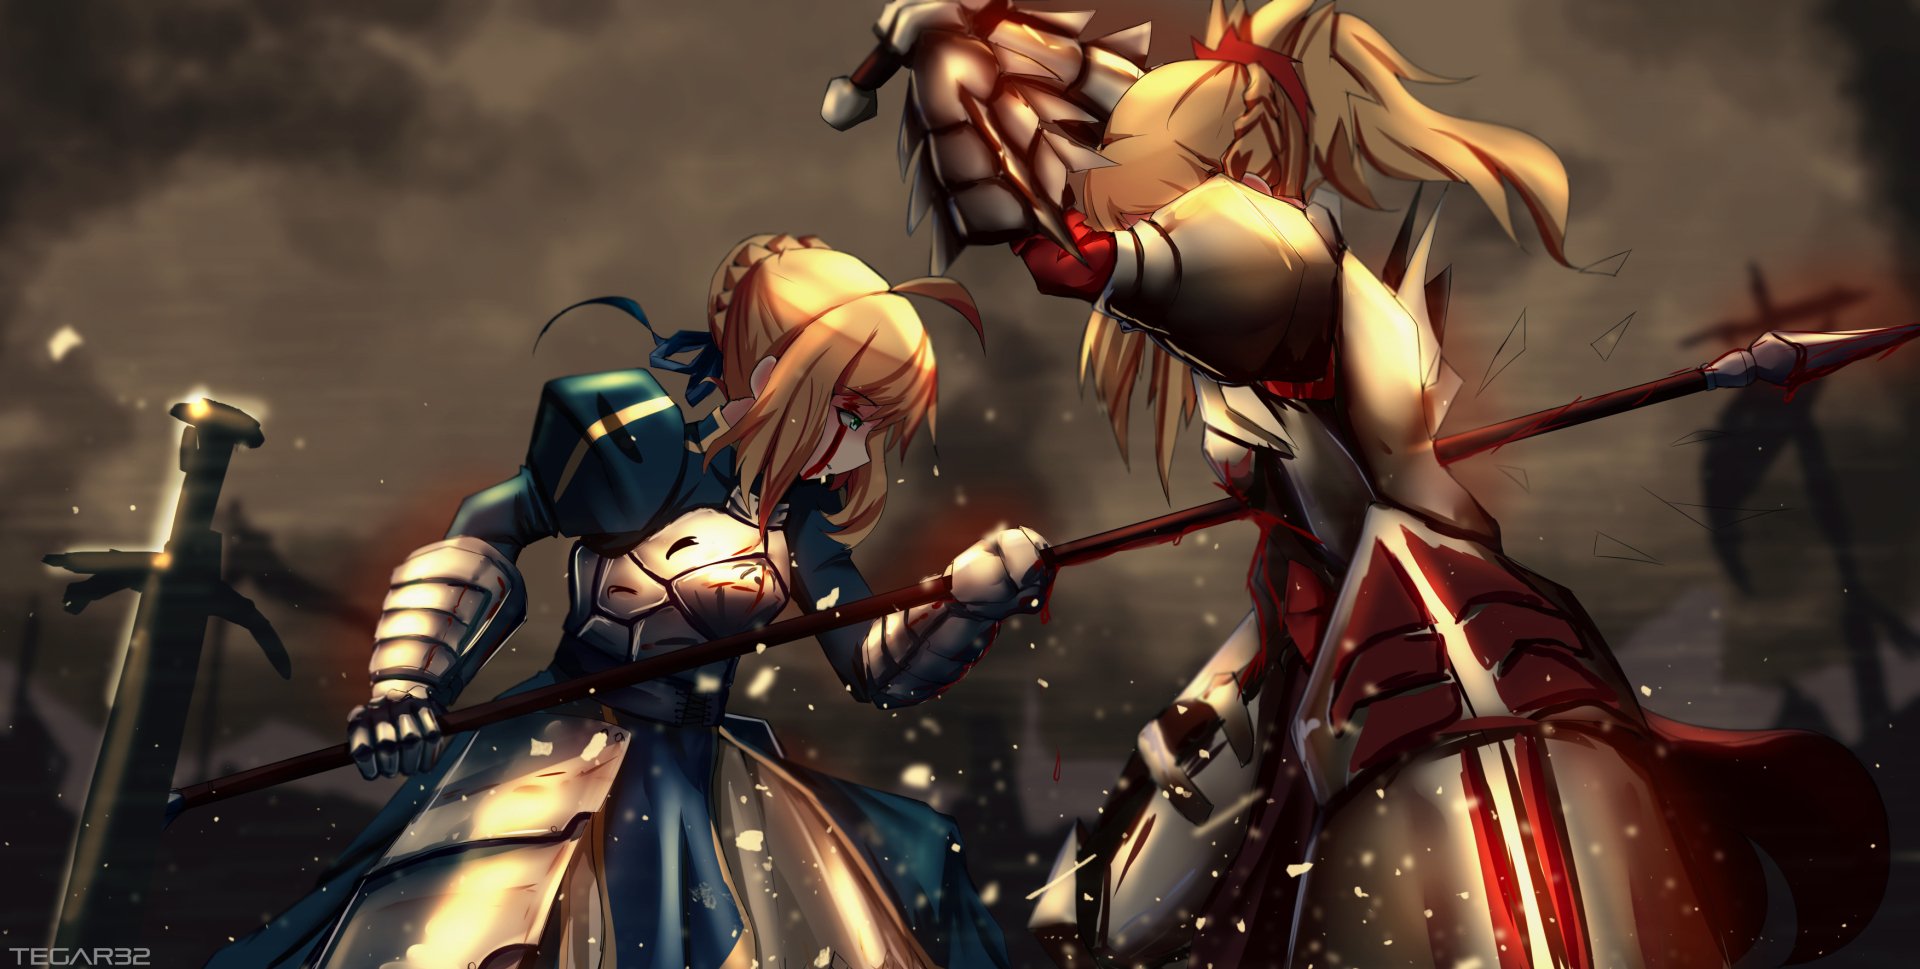 Fateapocrypha Hd Wallpaper Background Image 3508x1771